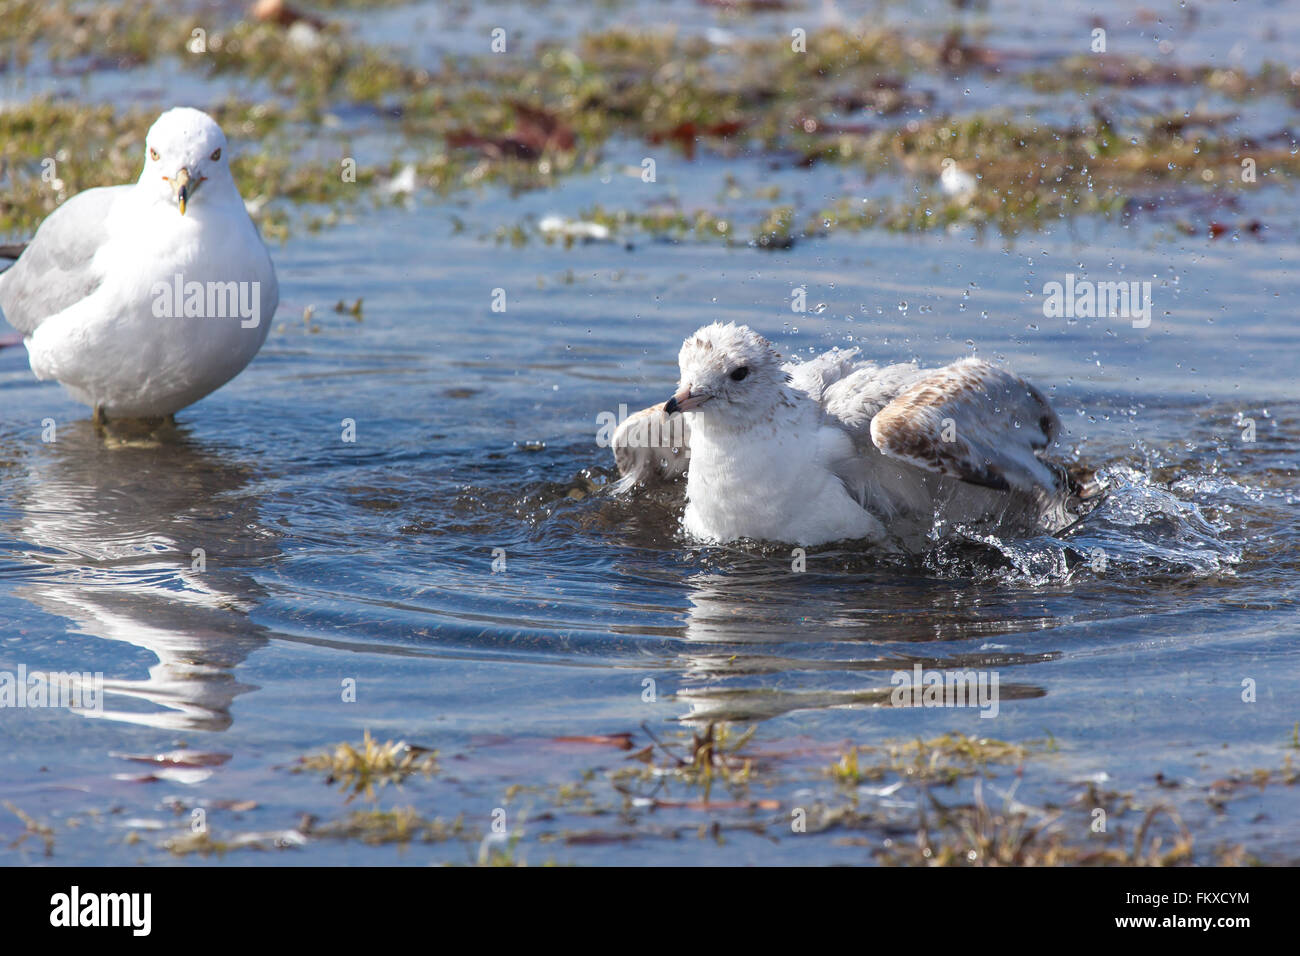 A Sea gull splashes in a puddle. Stock Photo